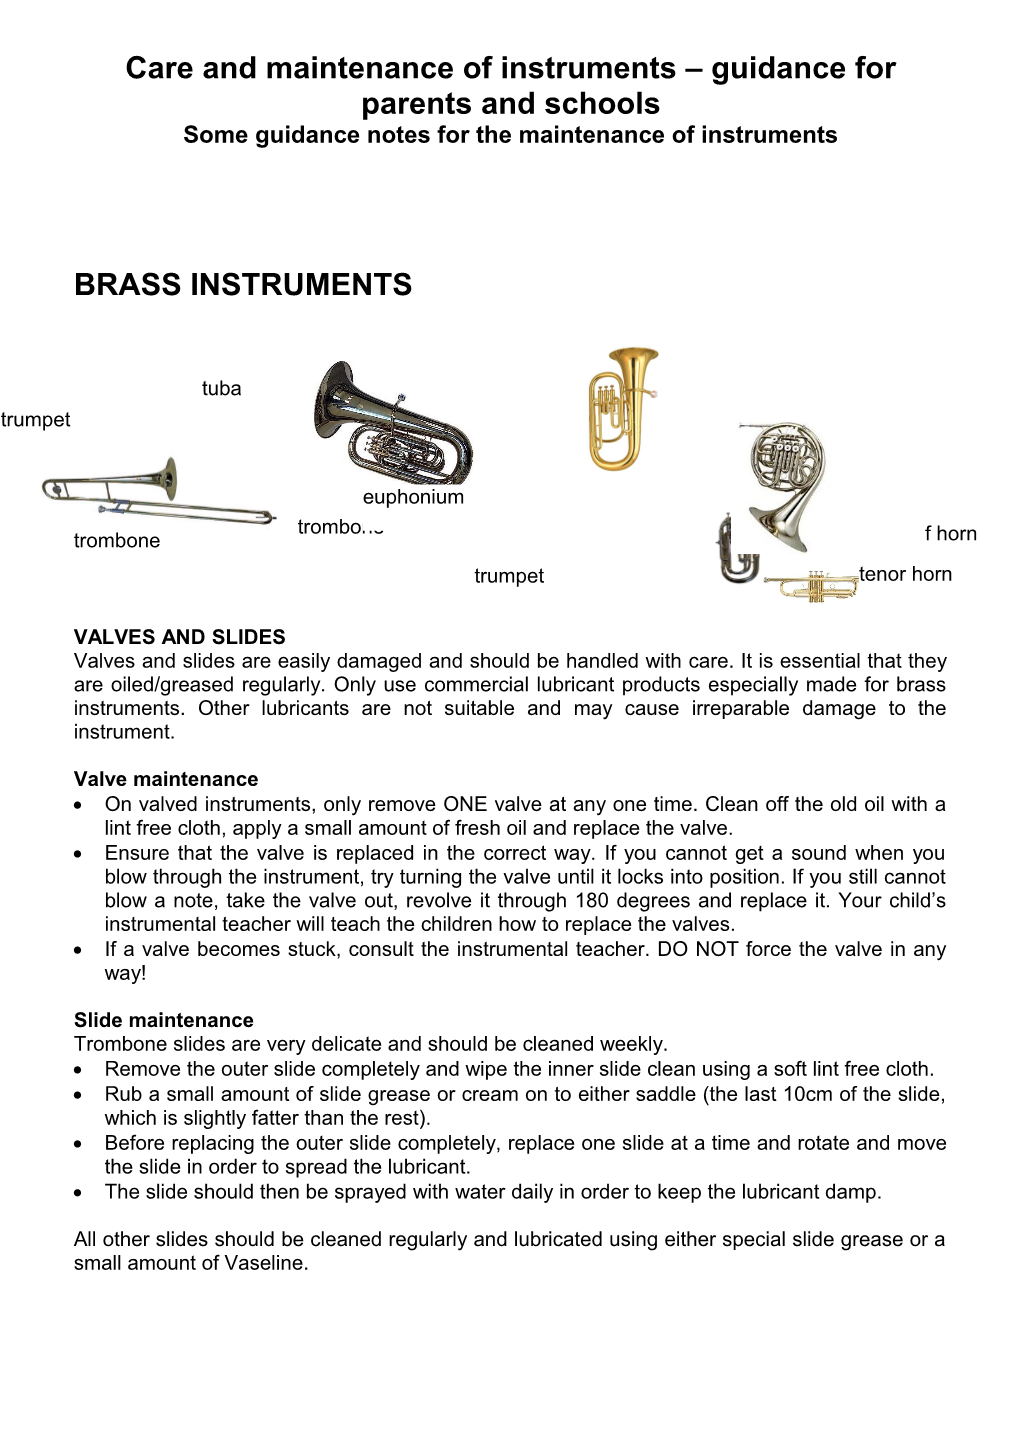 Care and Maintenance of Instruments Guidance for Parents and Schools